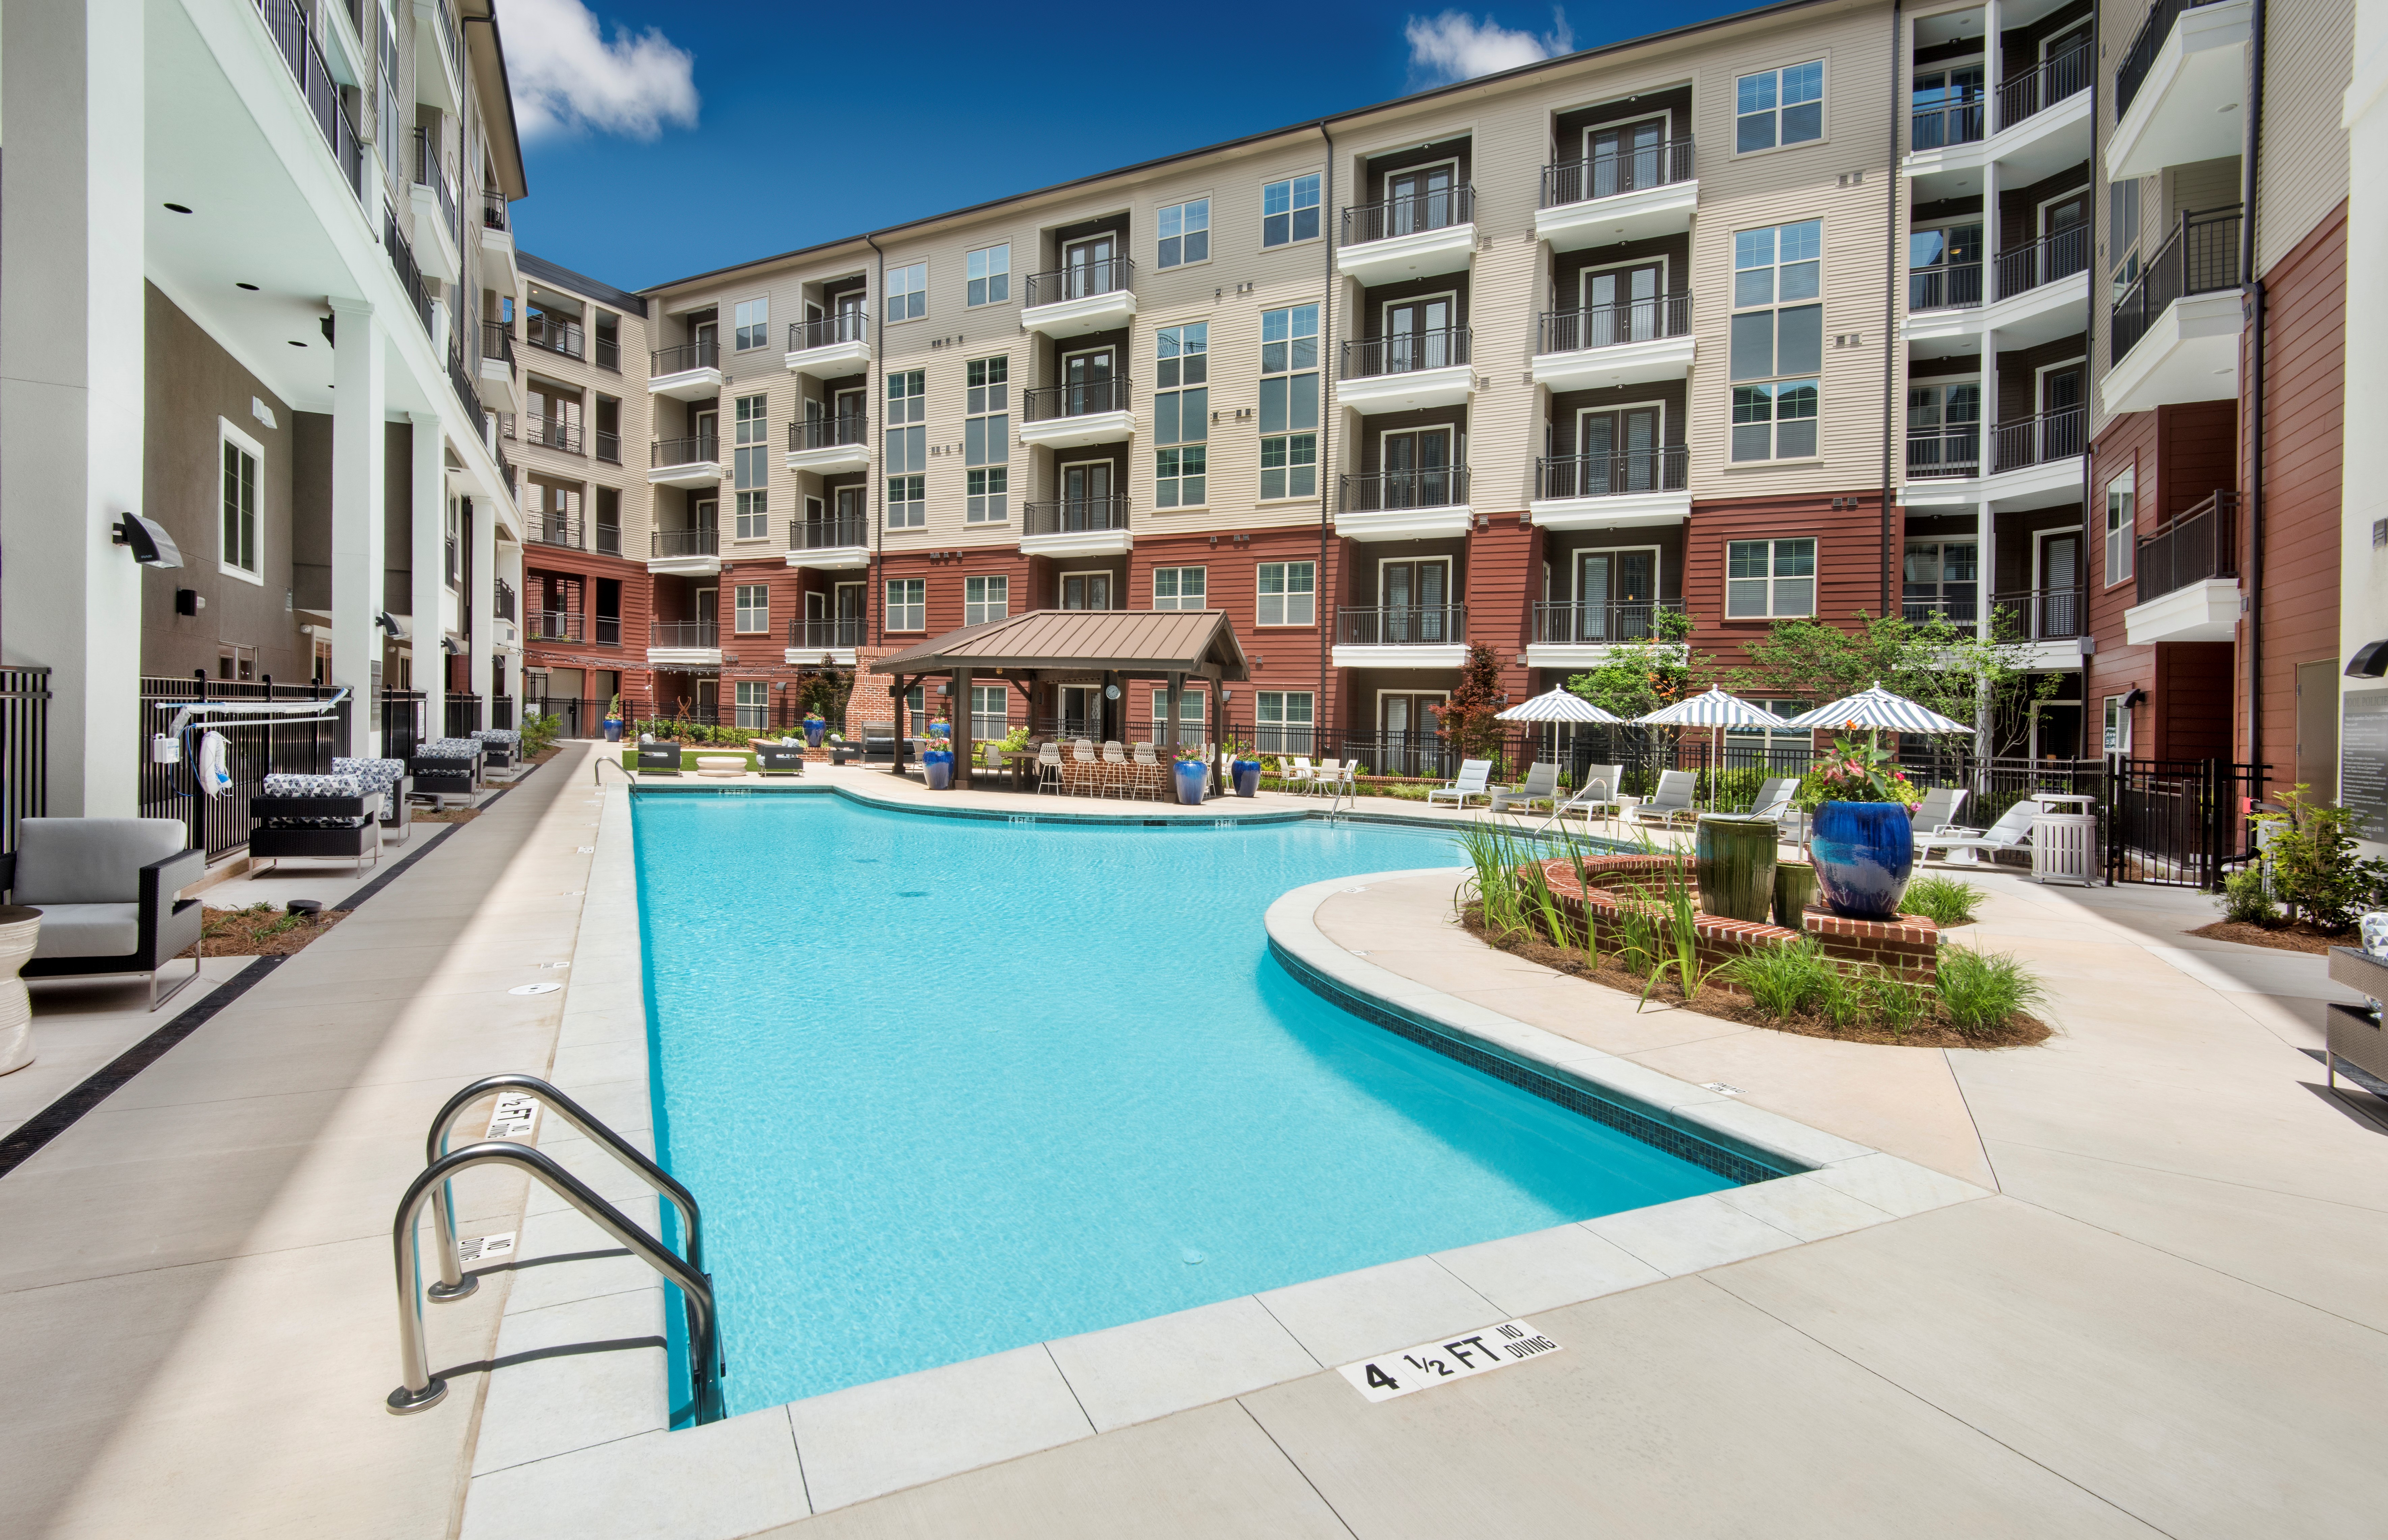 Overture Buckhead South 55+ Apartment Homes image